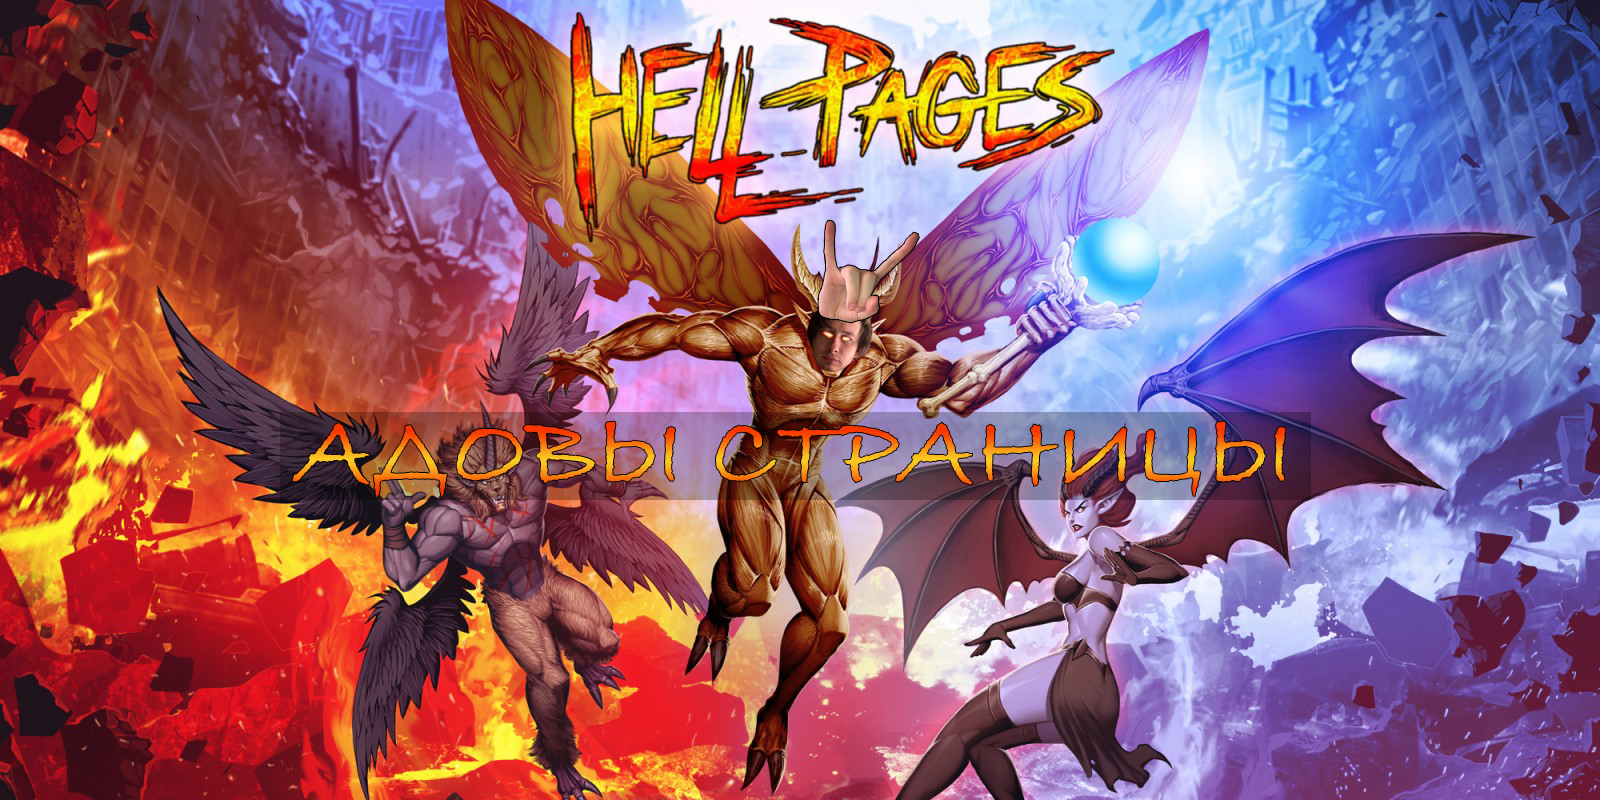 You are currently viewing Hell Pages №1 ↪ АДОВЫ СТРАНИЦЫ